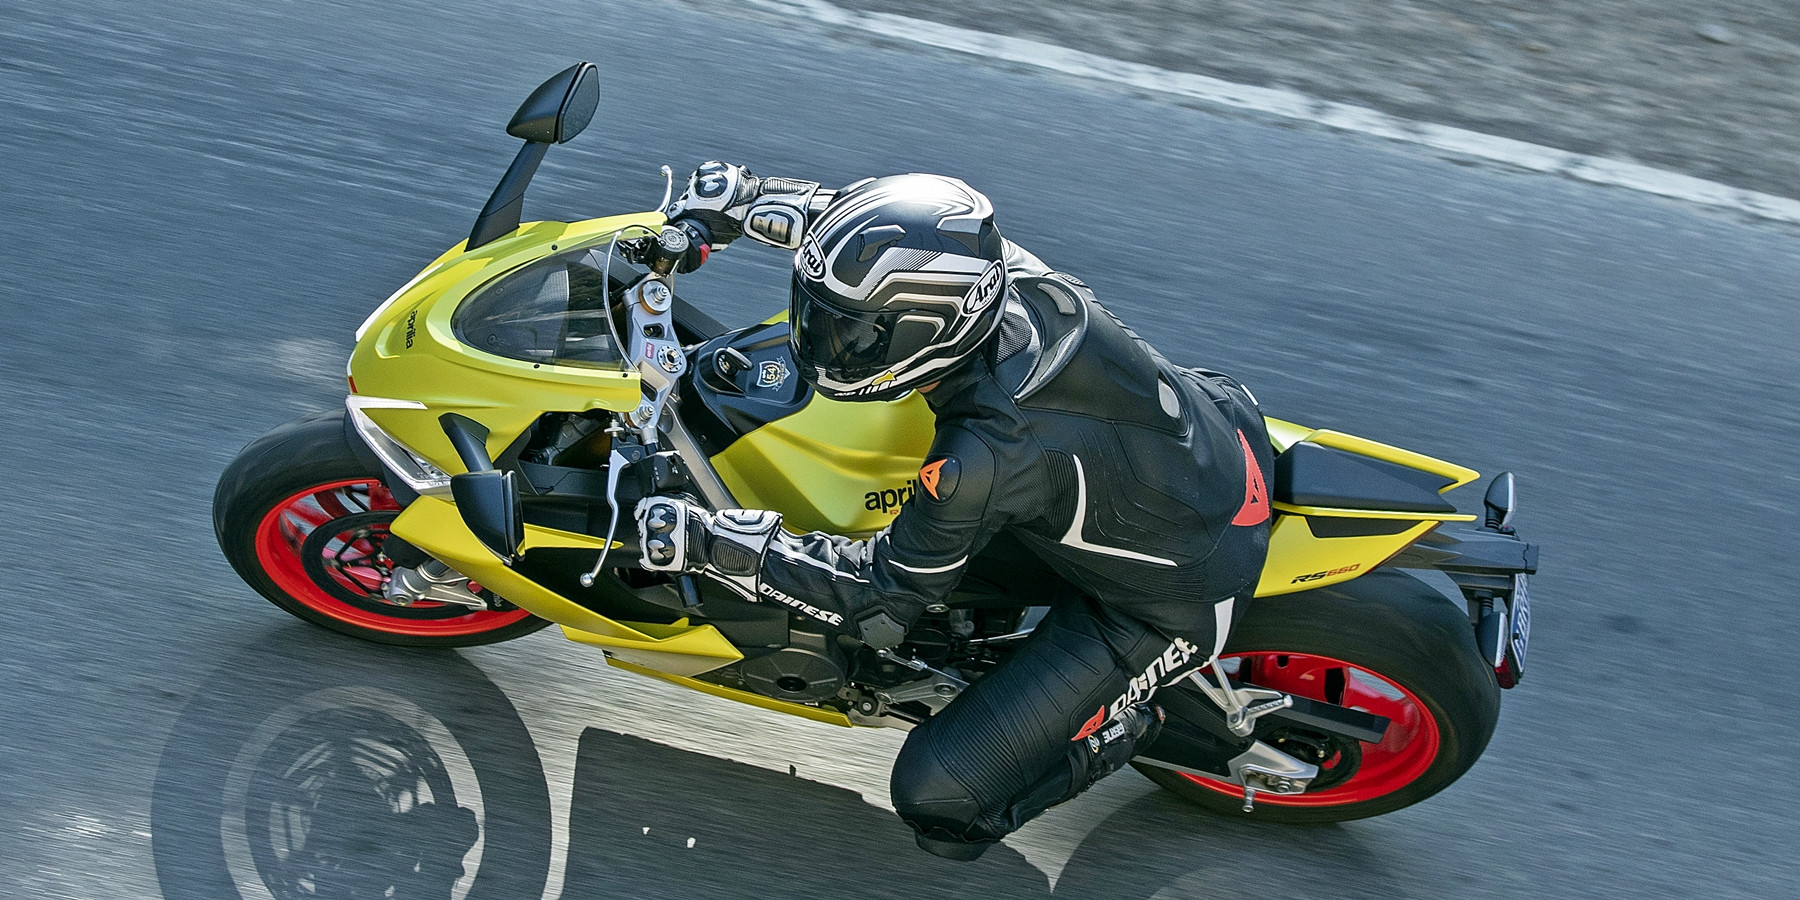 The light, narrow, stiff chassis is easy to flick from side to side, and the torquey powerband and spot-on mapping makes getting on the throttle and driving out of the corners easy and precise. Photo by Kevin Wing, courtesy of Aprilia.